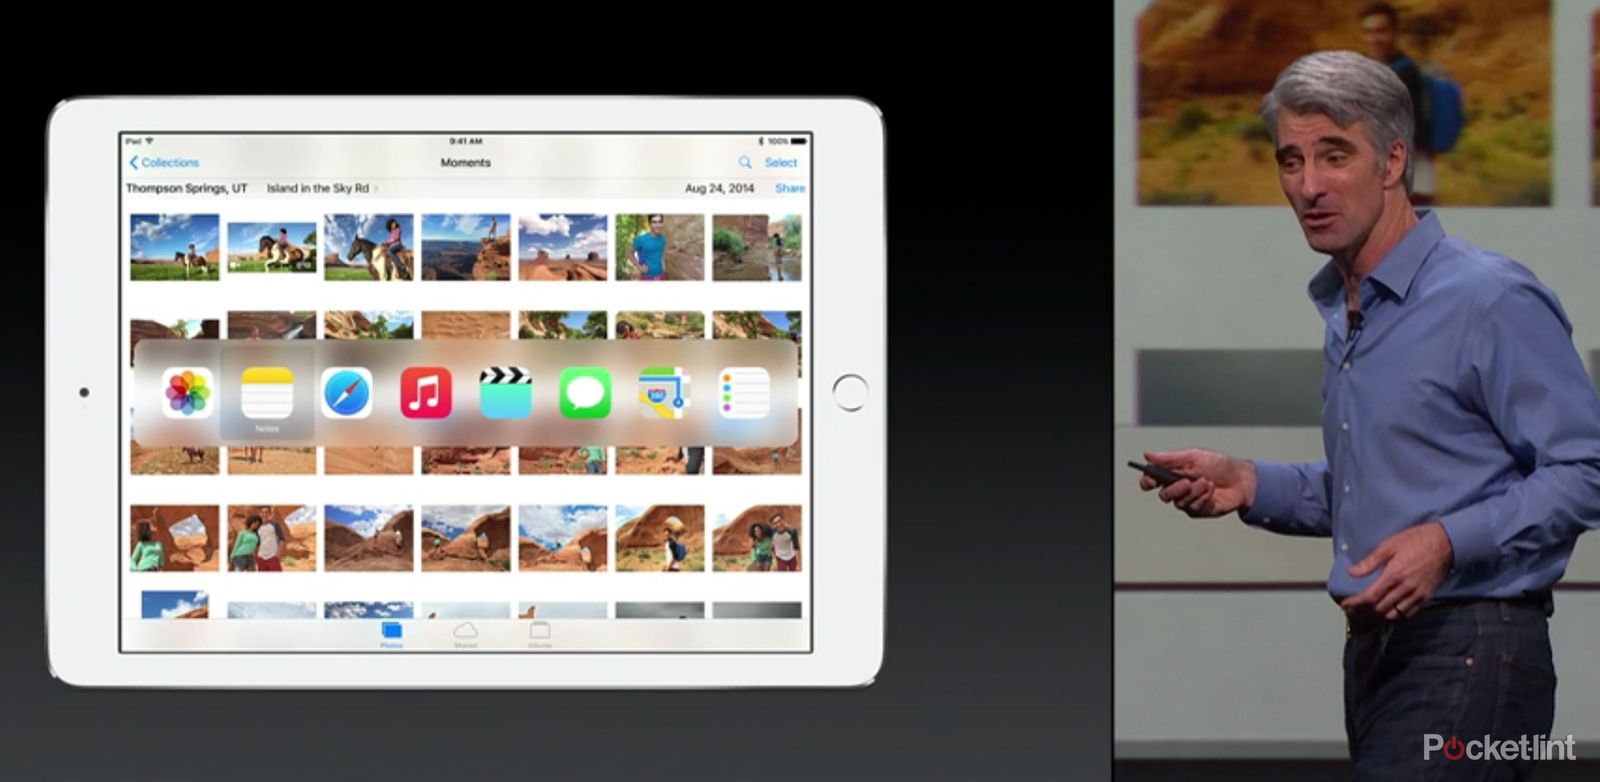 ios 9 for ipad gets extra features quicktype multitasking split view windows and more image 1